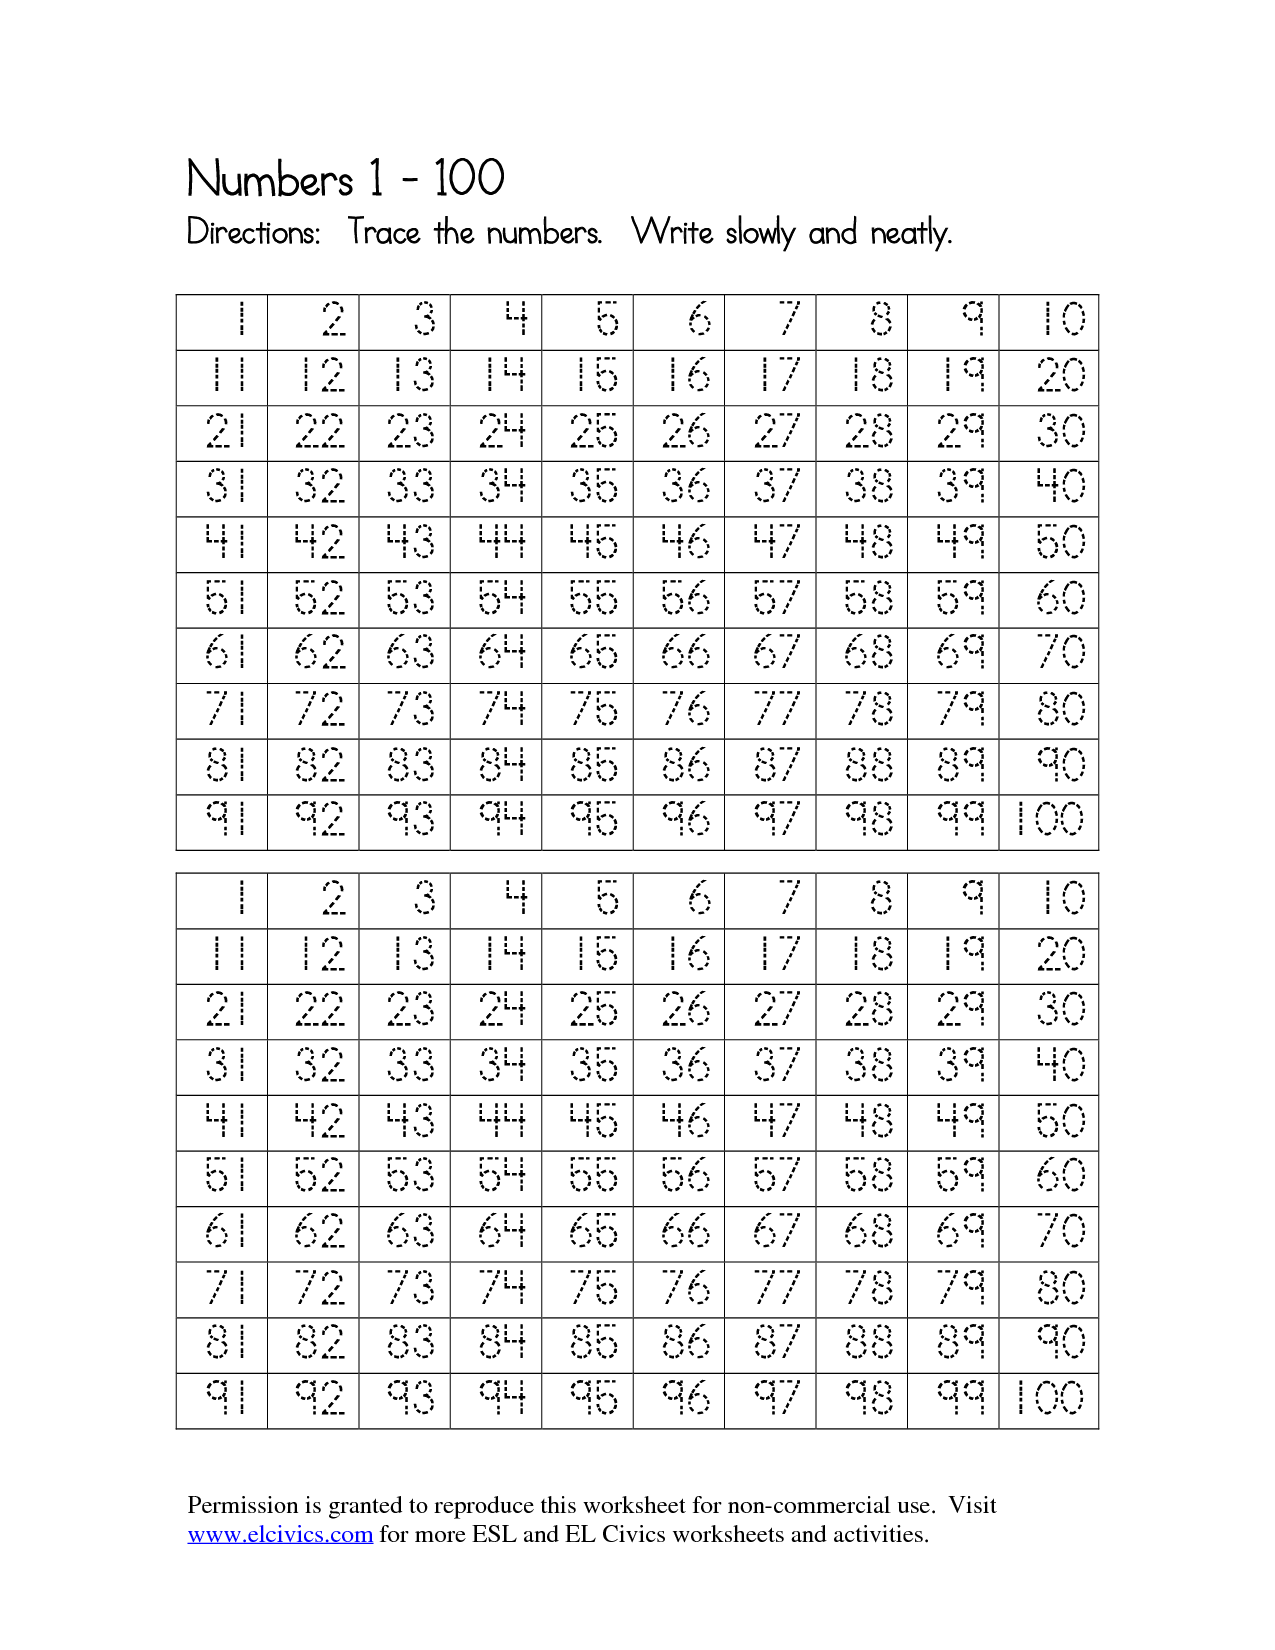 Tracing Numbers 1-100 Worksheets Image